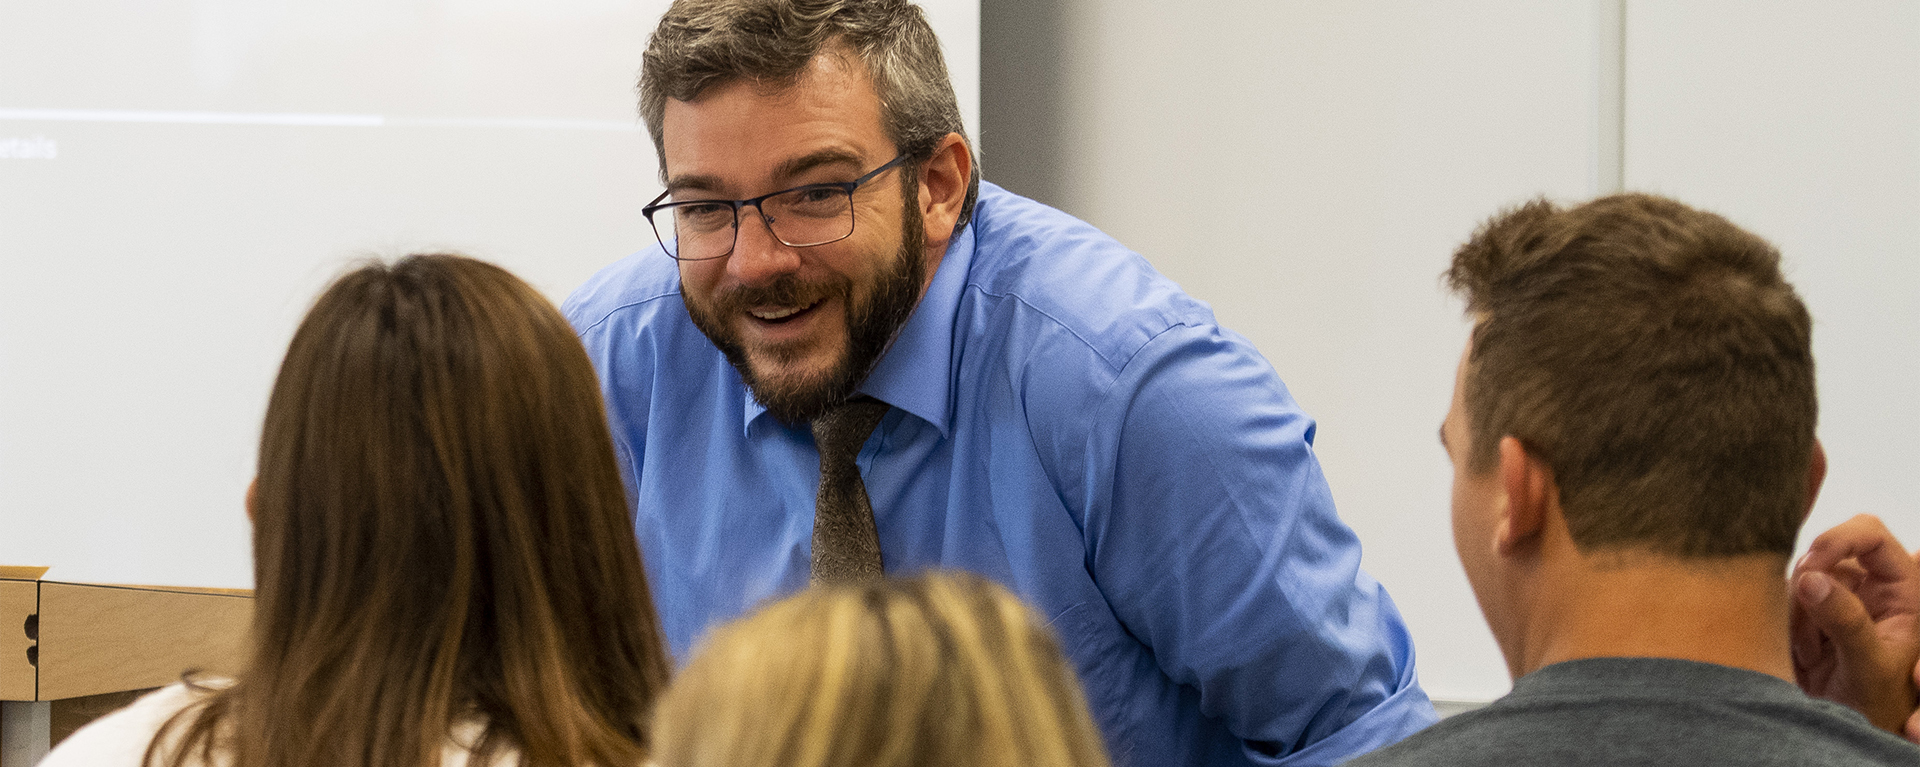 A professor smiles while talking with students.